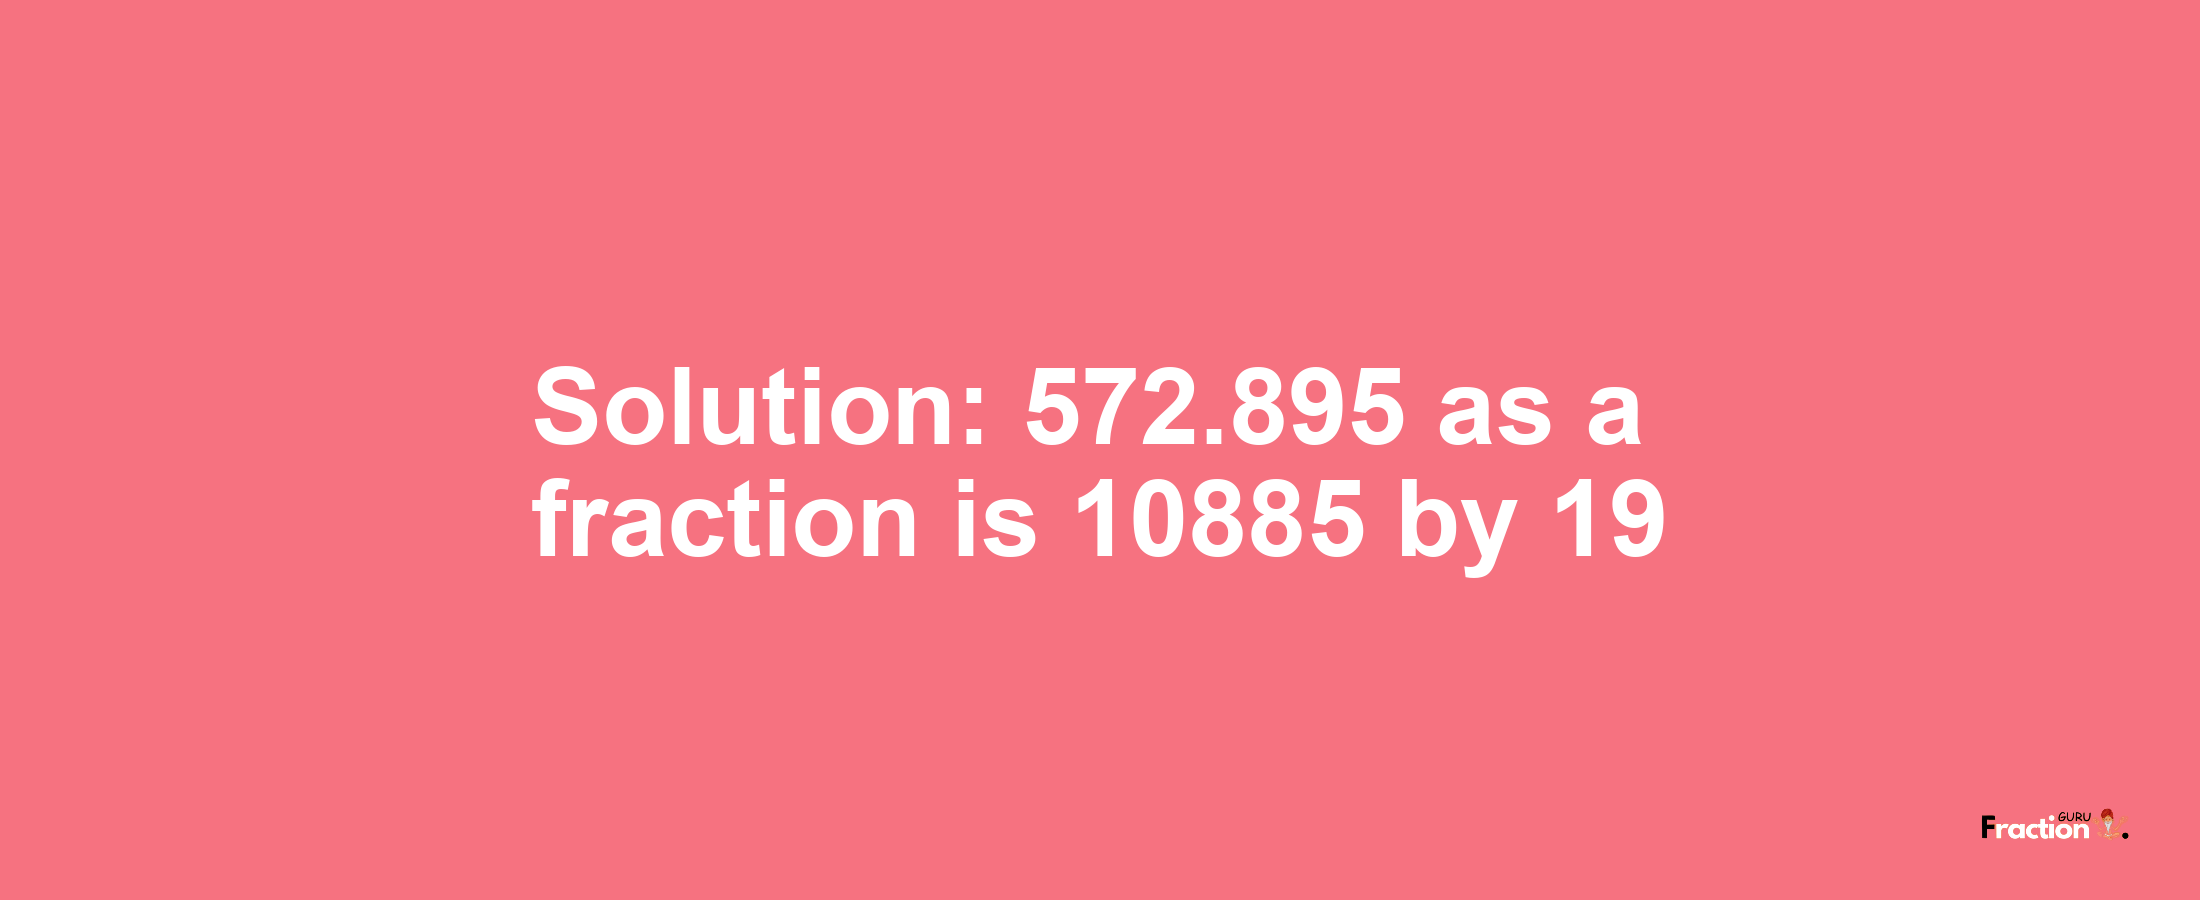 Solution:572.895 as a fraction is 10885/19